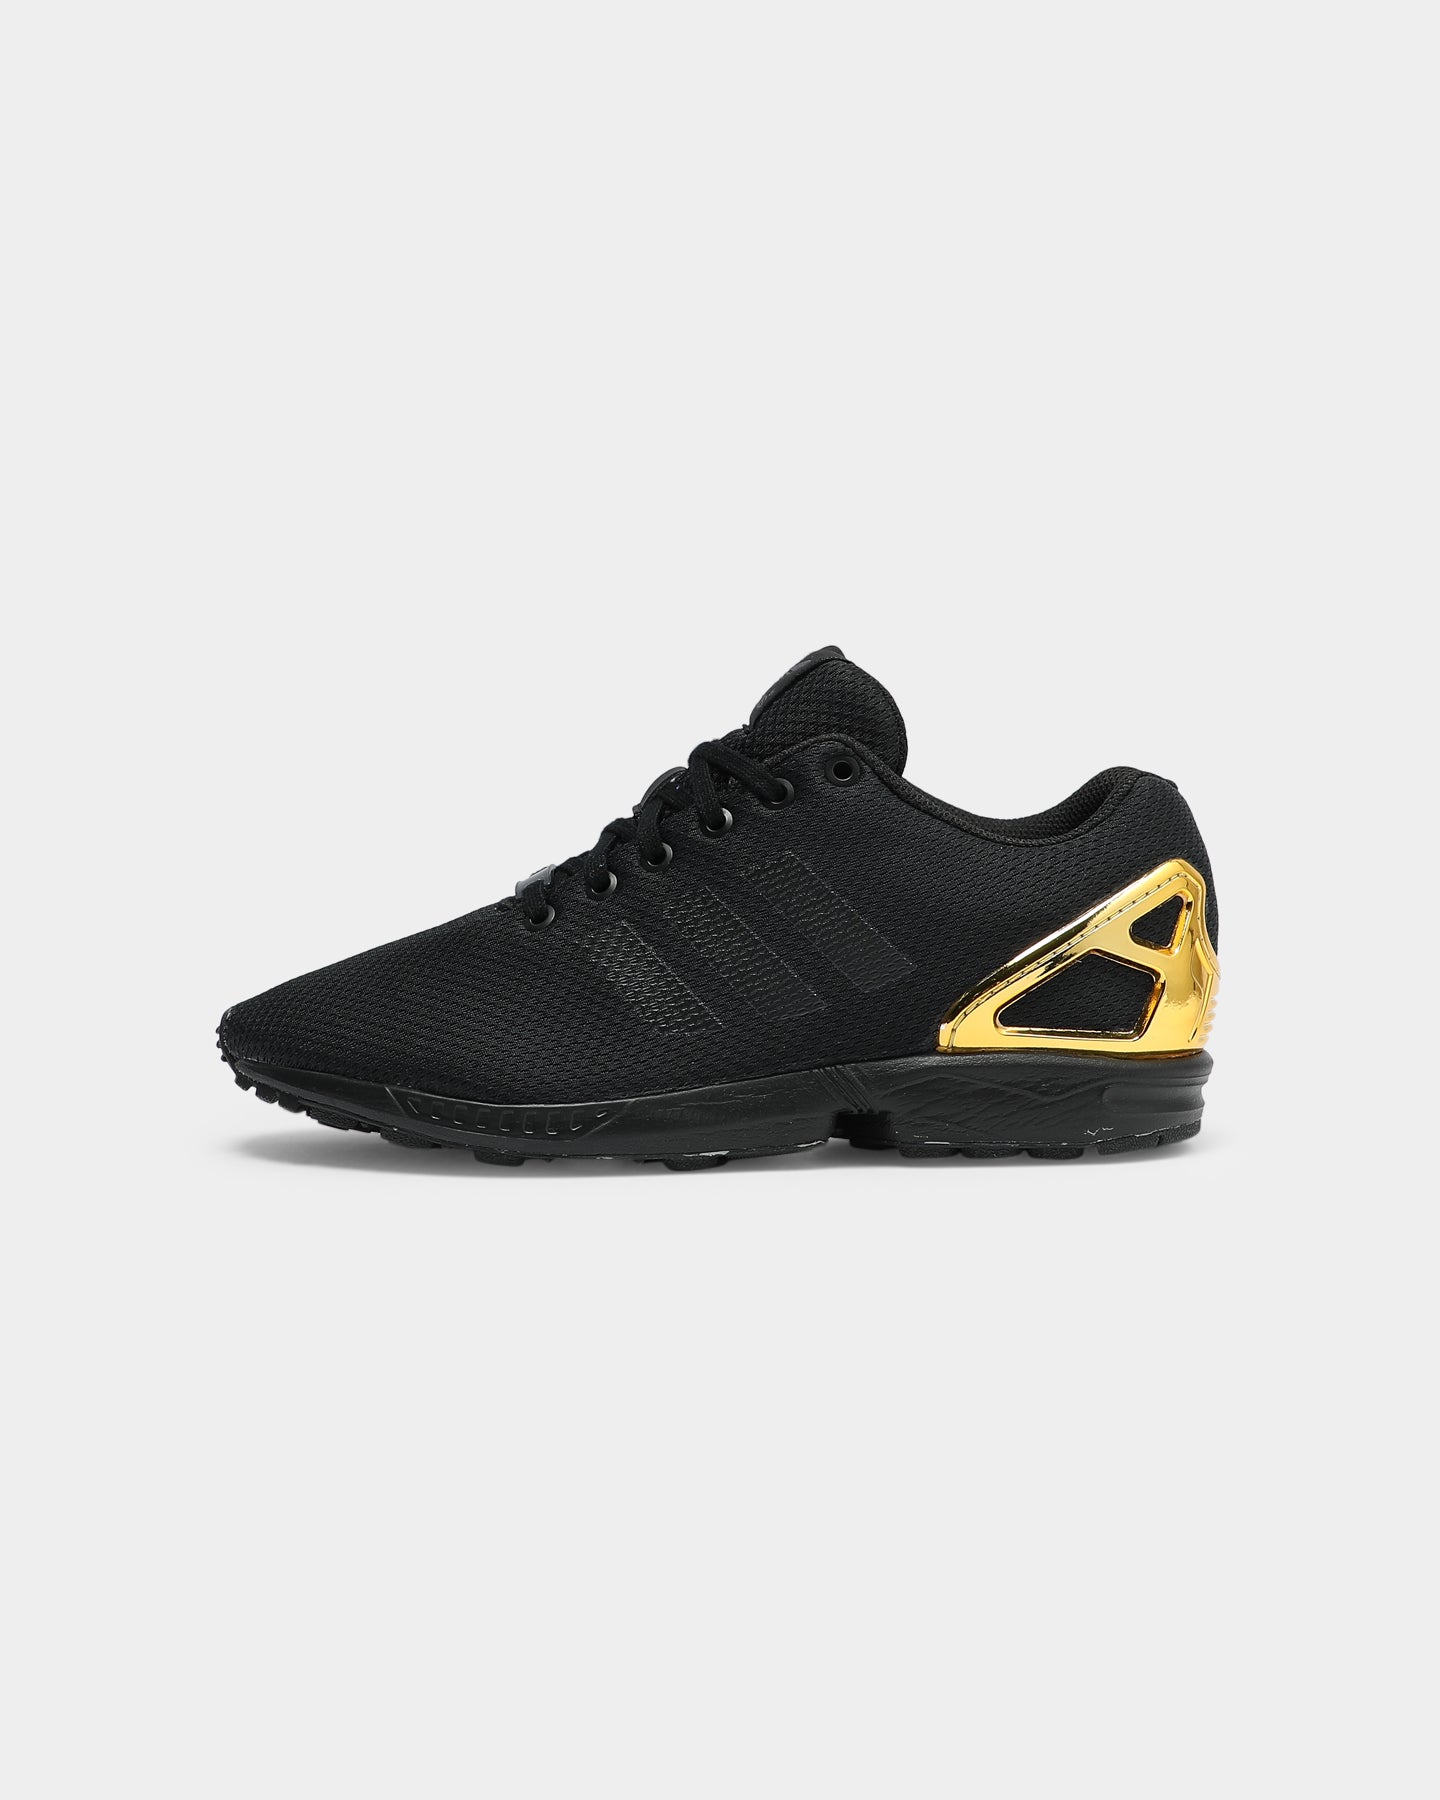 adidas shoes zx flux black and gold